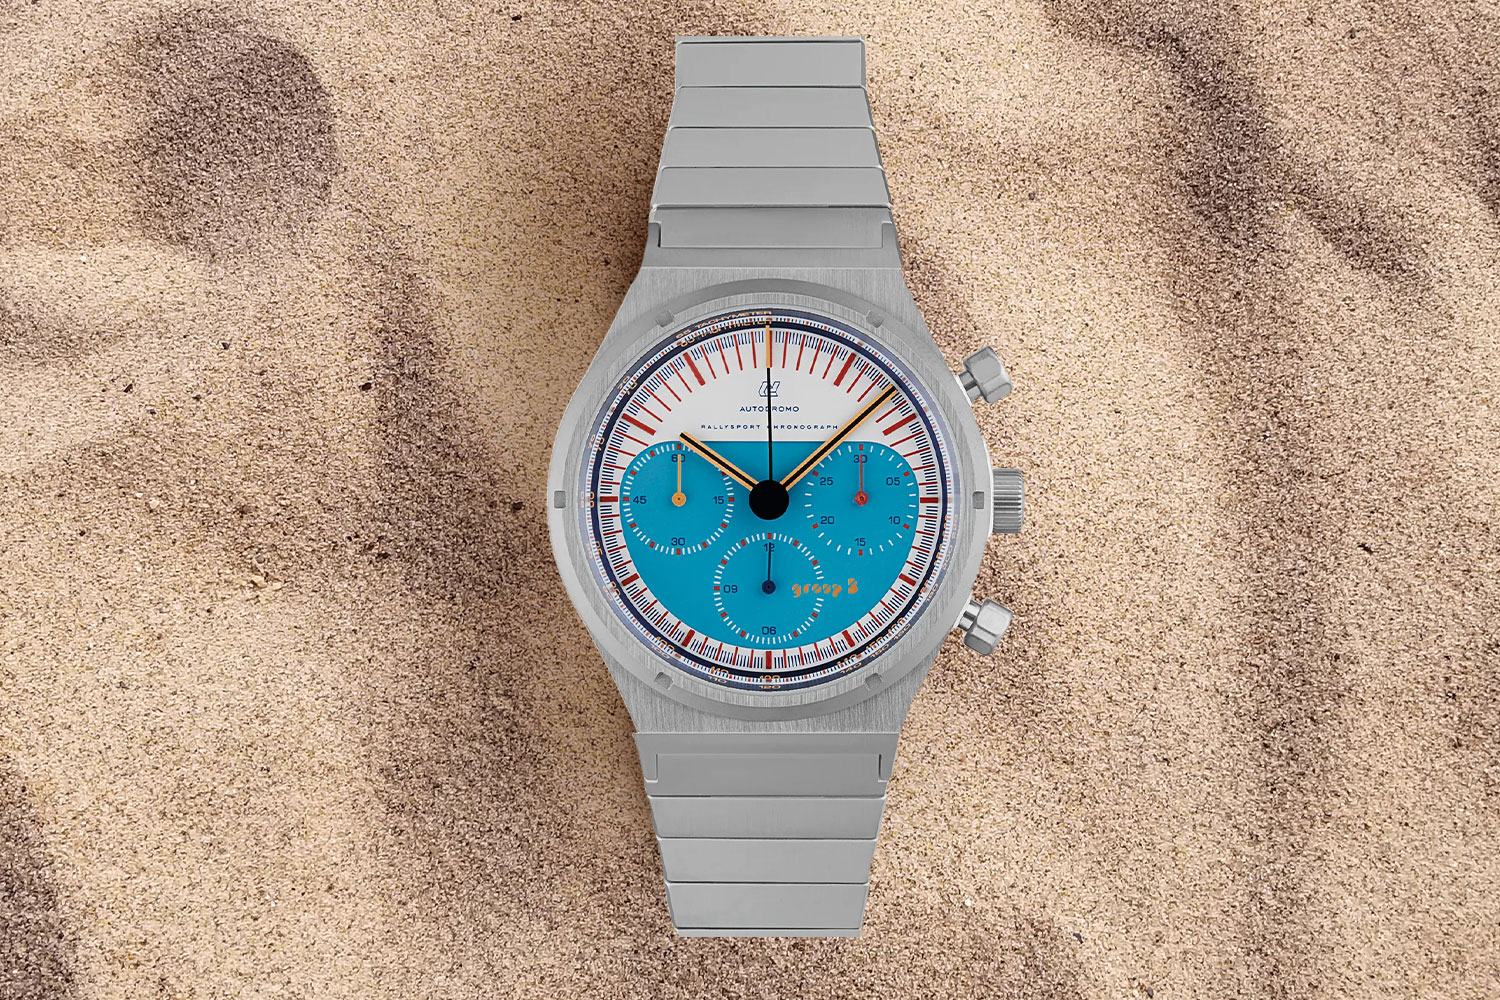 Blue and gray watch in the sand.